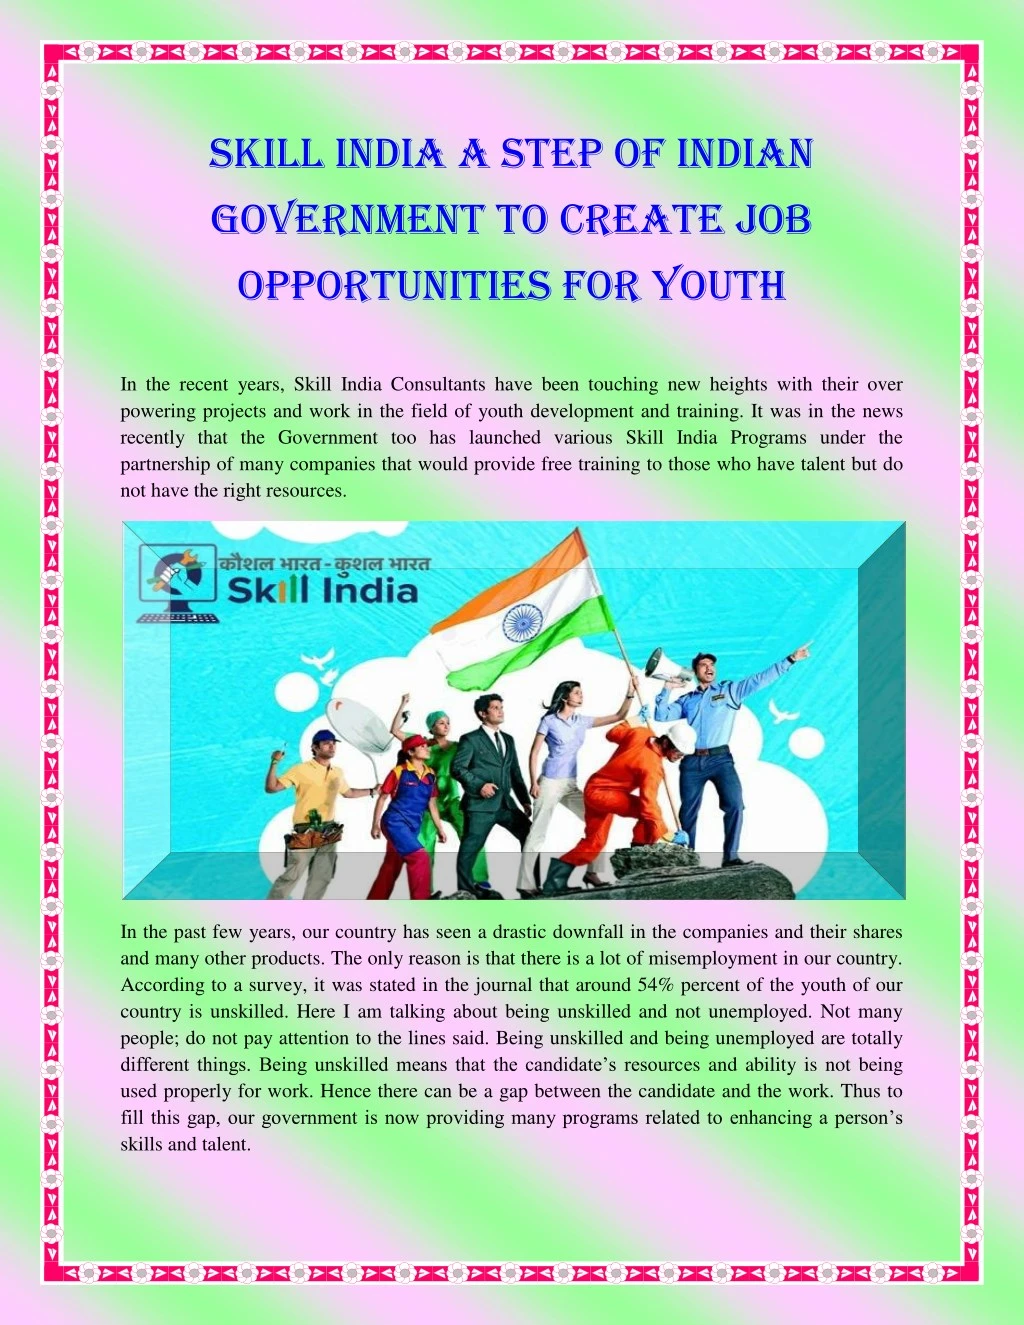 skill india a step of indian government to create